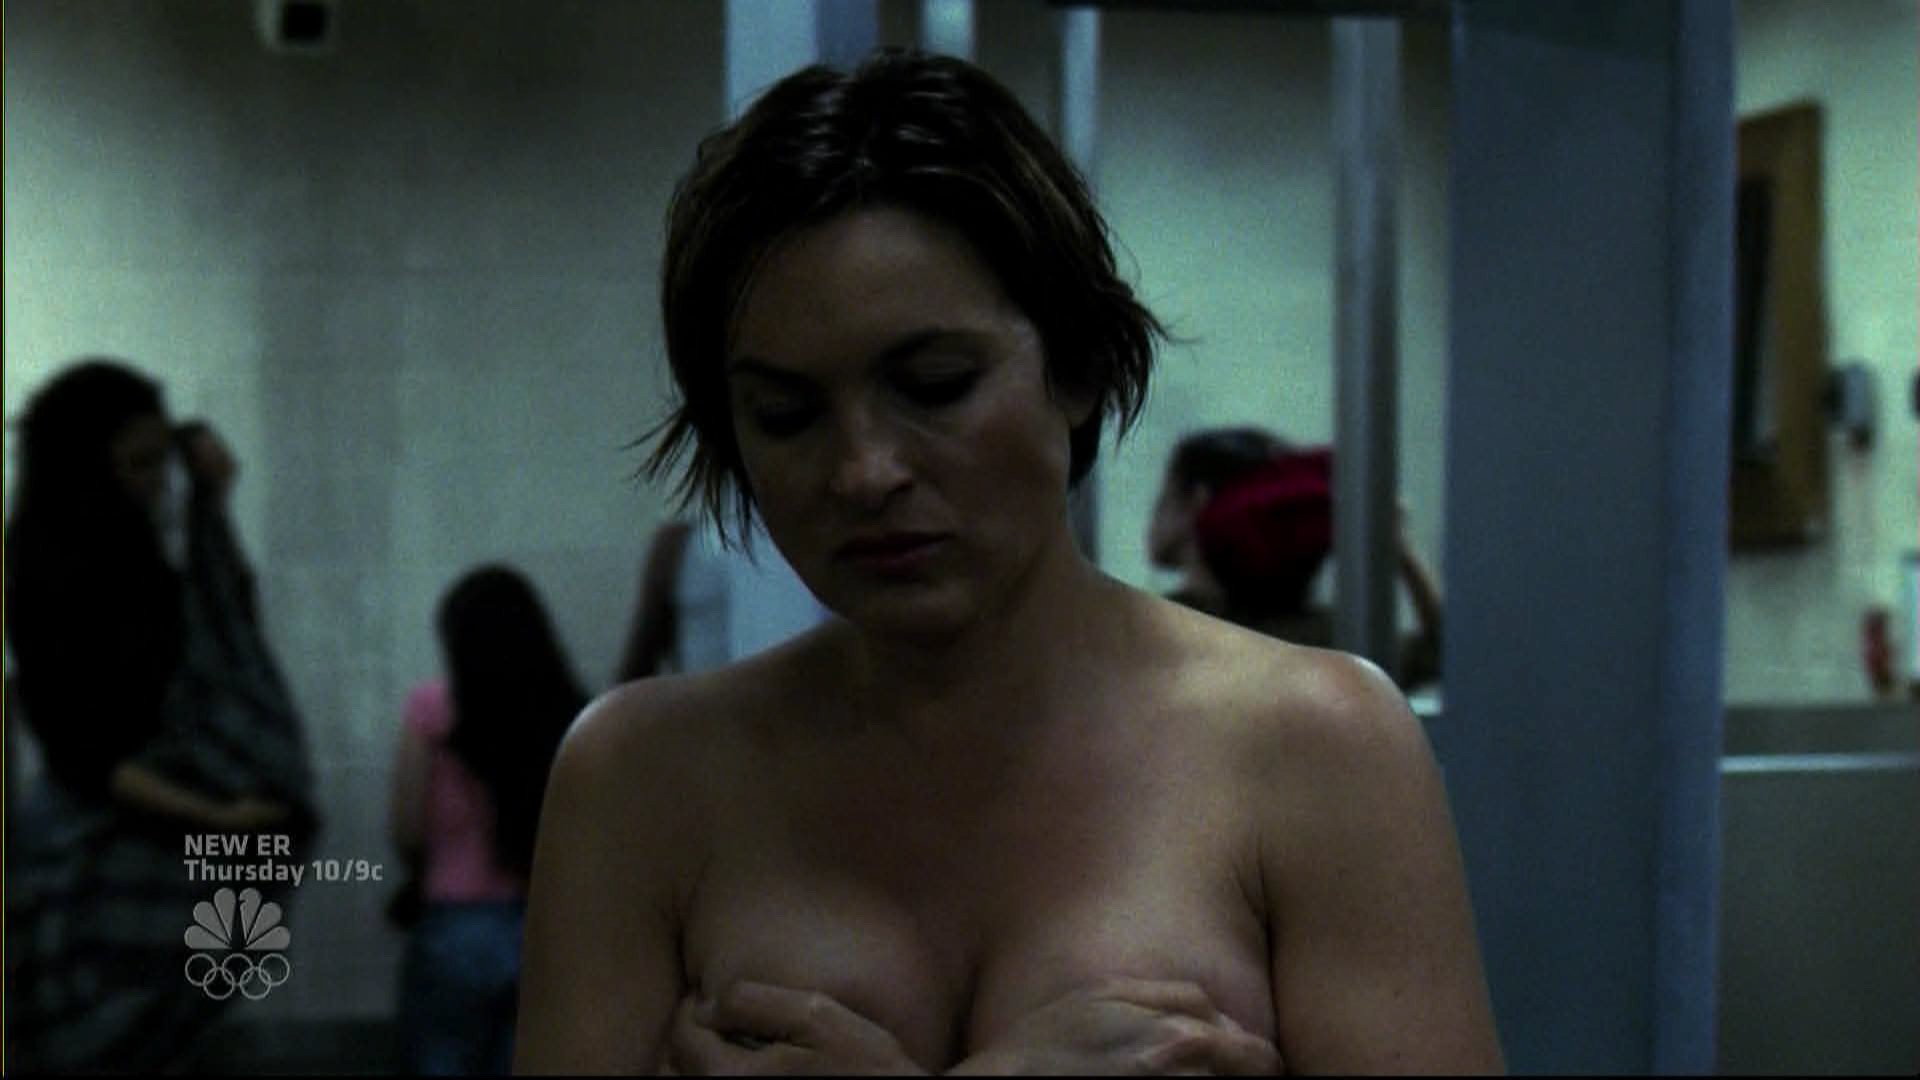 Law and order actress nude